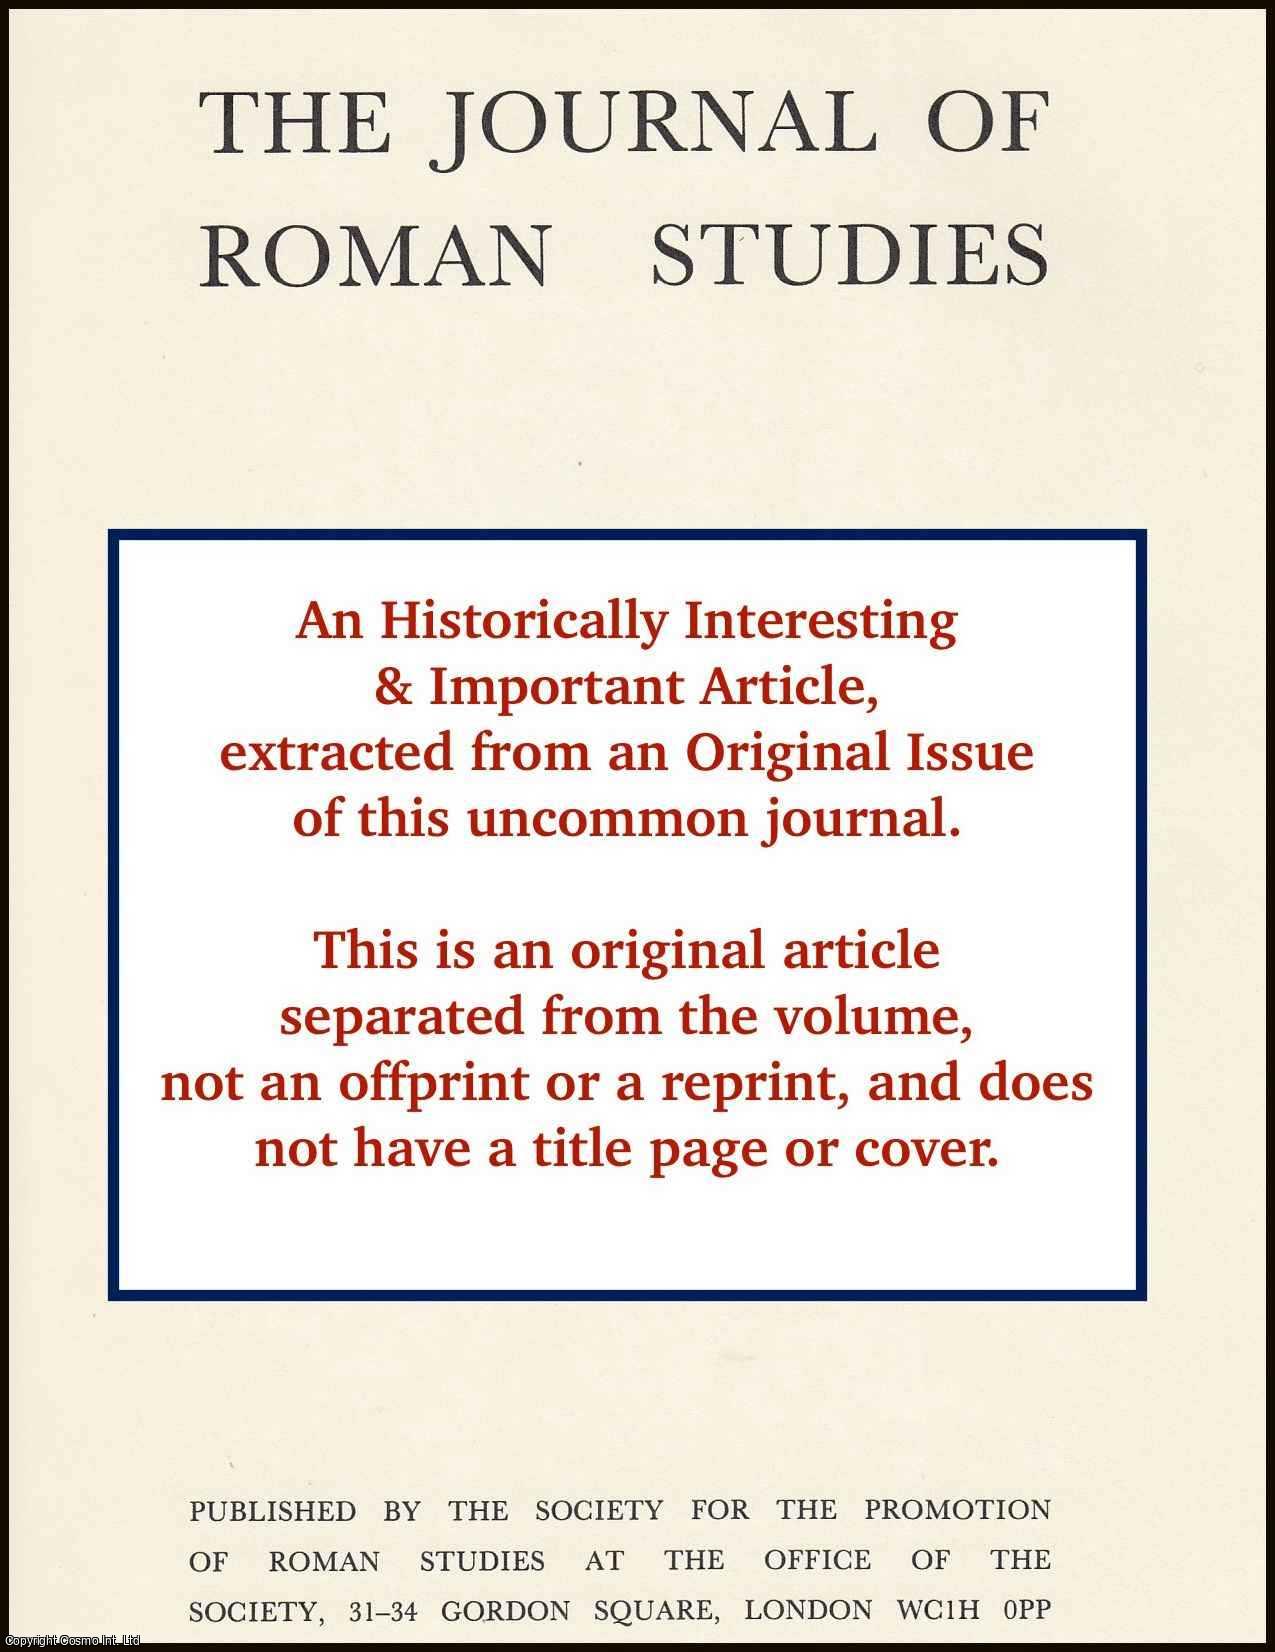 I. M. F. Garnder and S. N. C. Lieu - From Narmouthis (Medinet Madi) to Kellis (Ismant El-Kharab): Manichaean Documents from Roman Egypt. An original article from the Journal of Roman Studies, 1996.